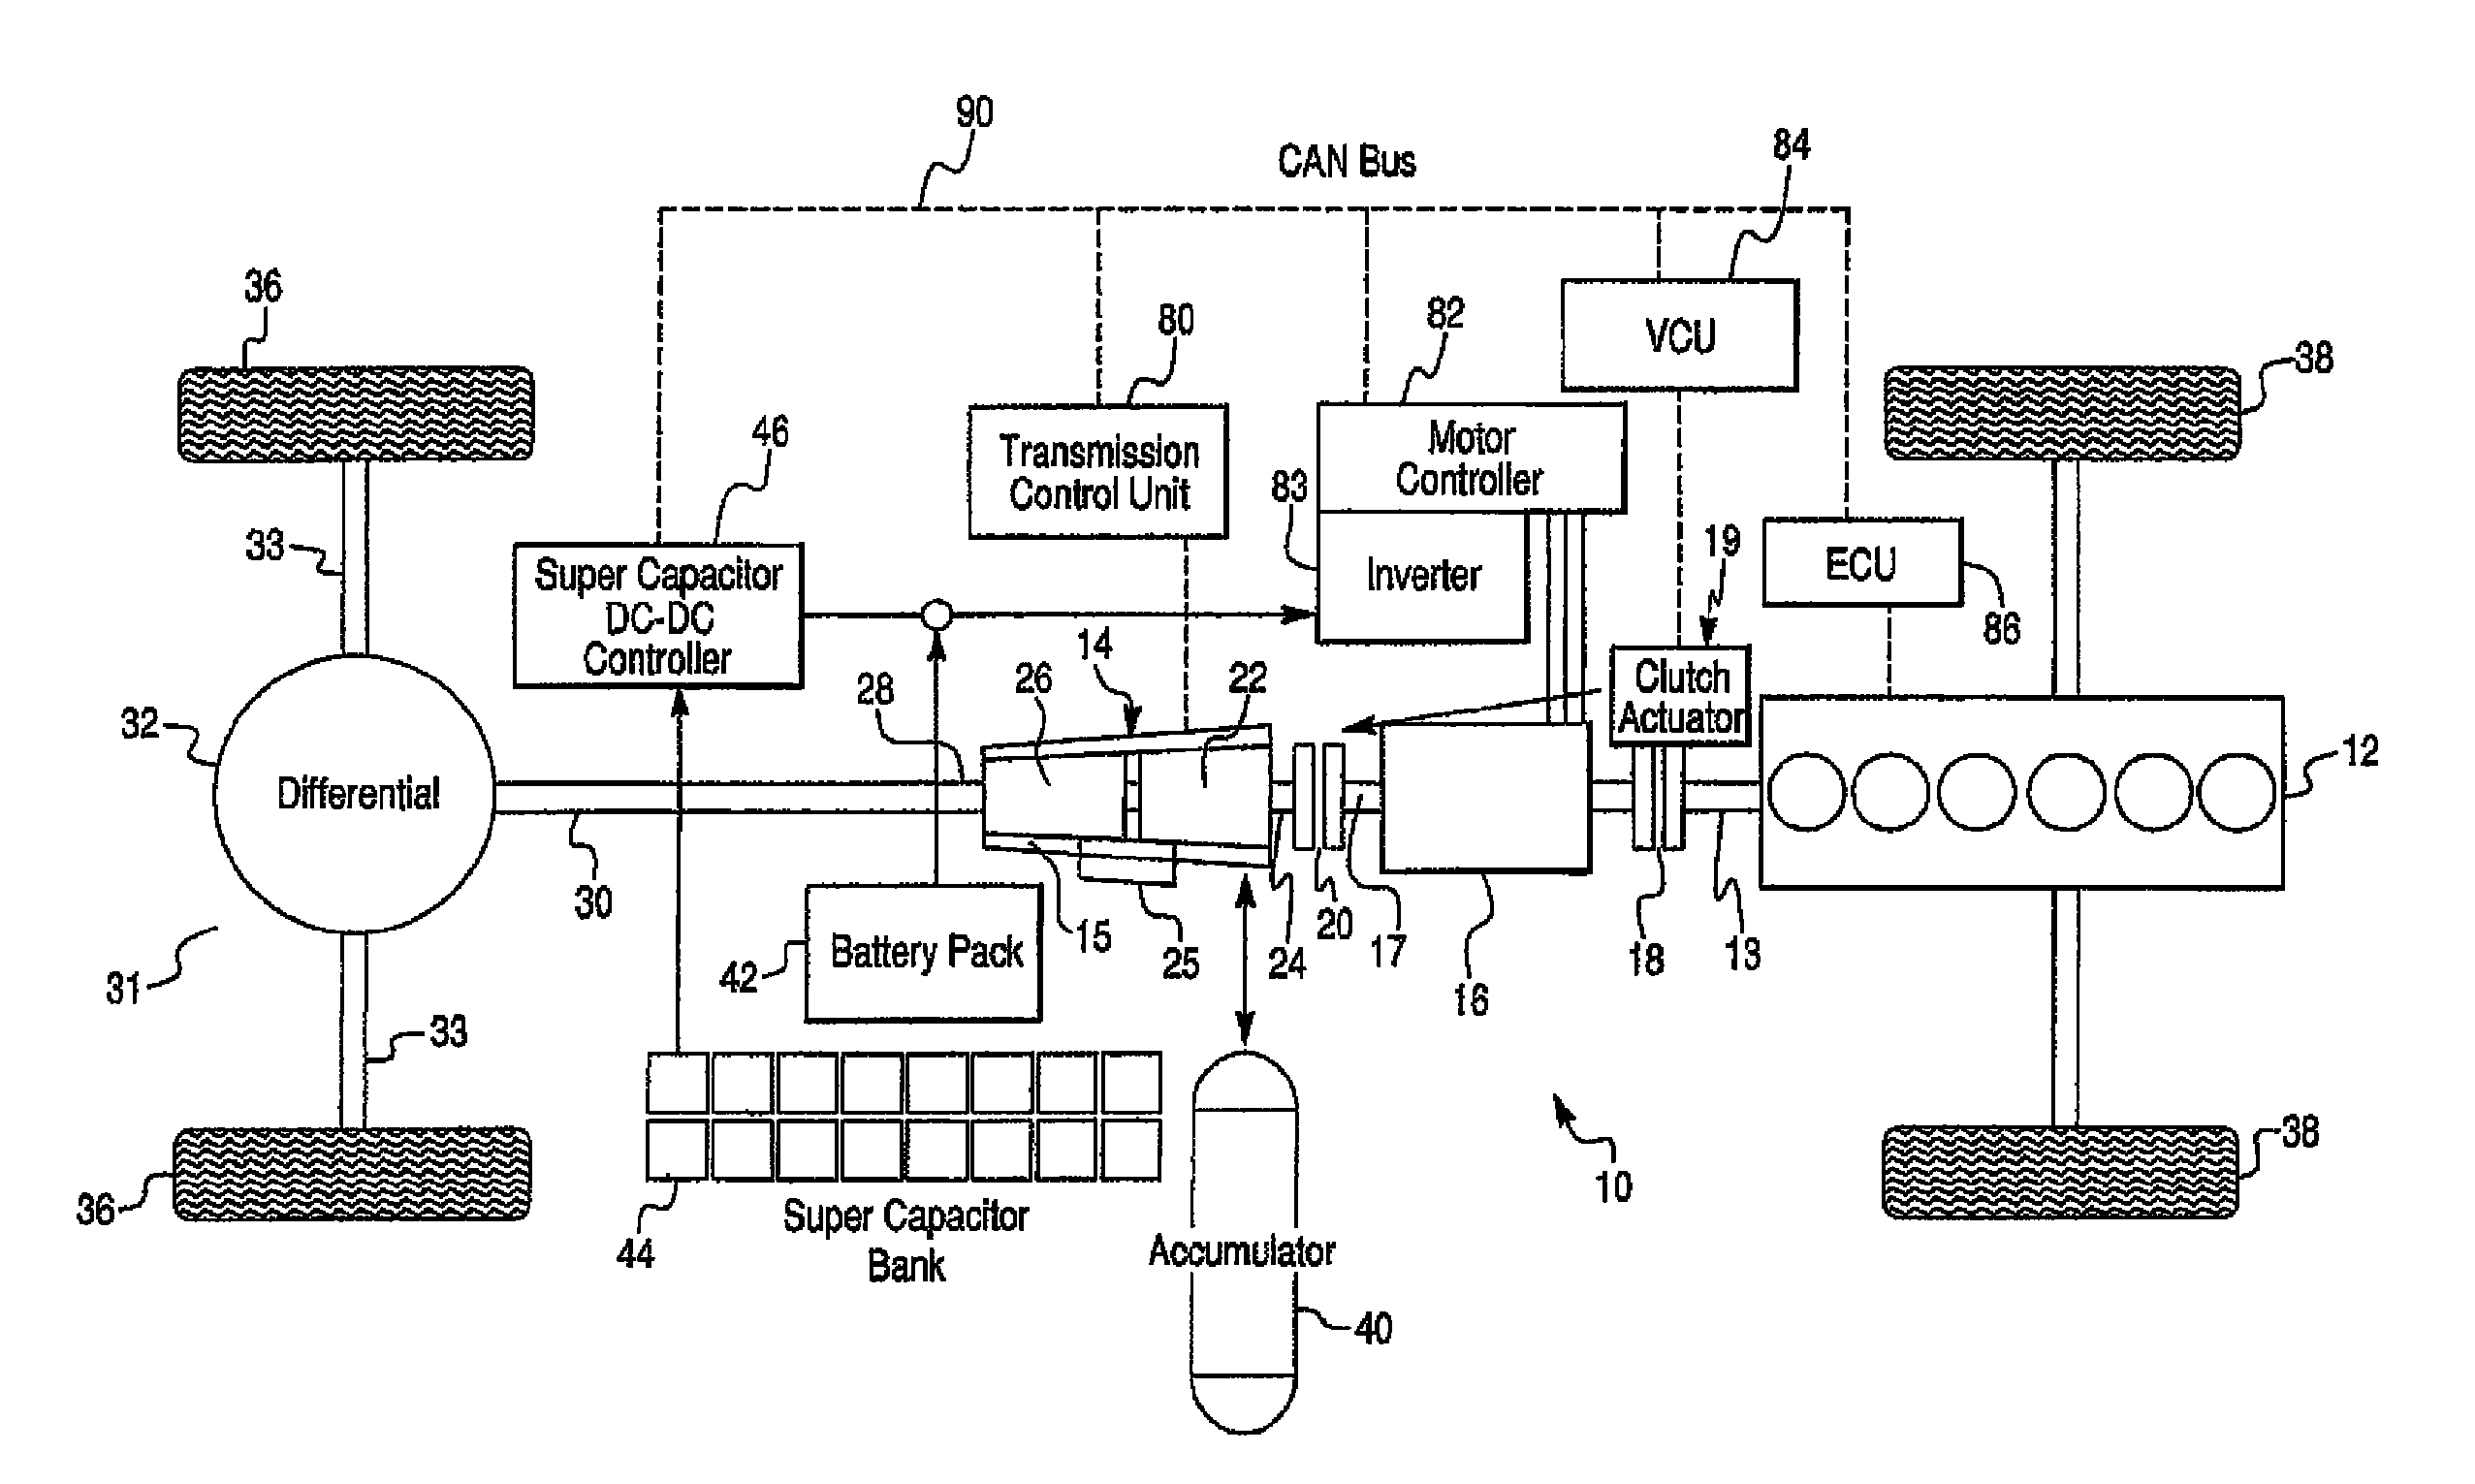 Hydro-electric hybrid drive system for motor vehicle